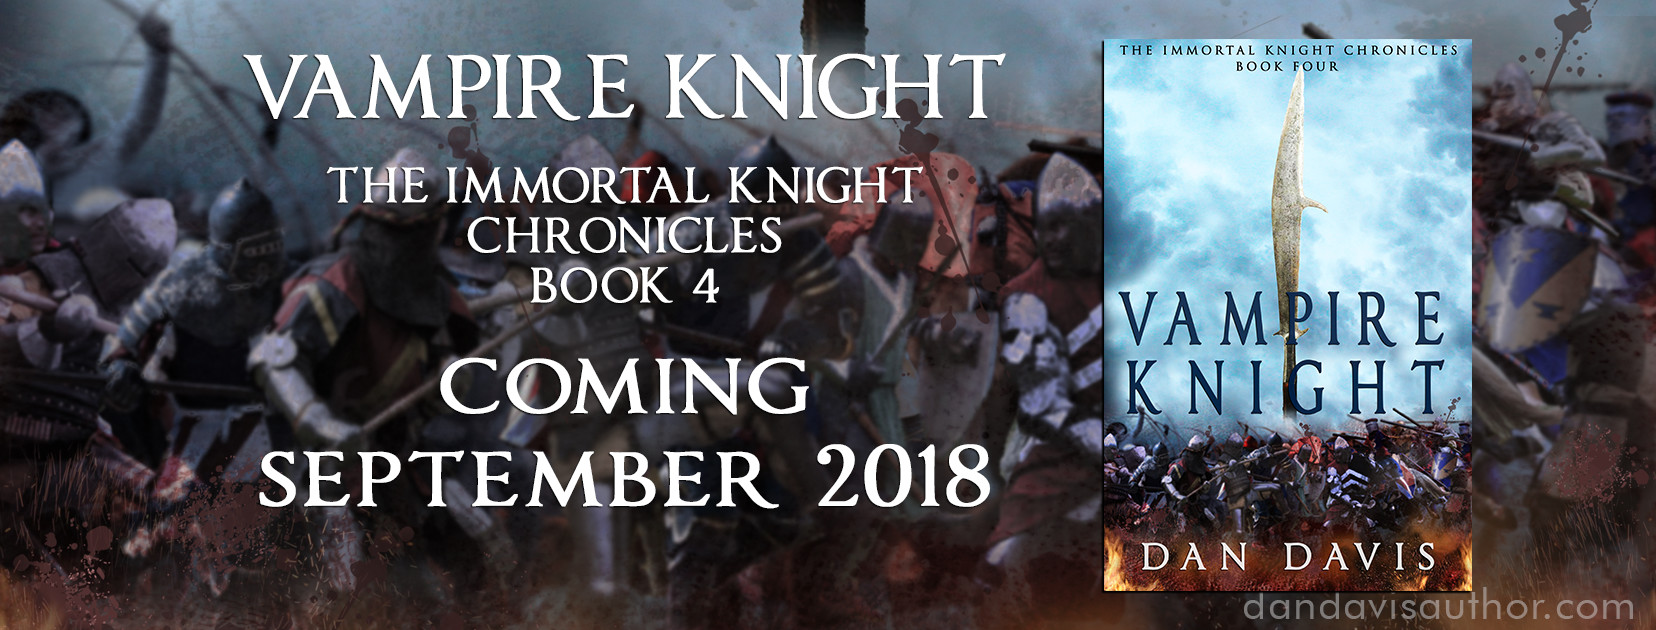 New Book Announcement – Vampire Knight – Coming Sept 2018